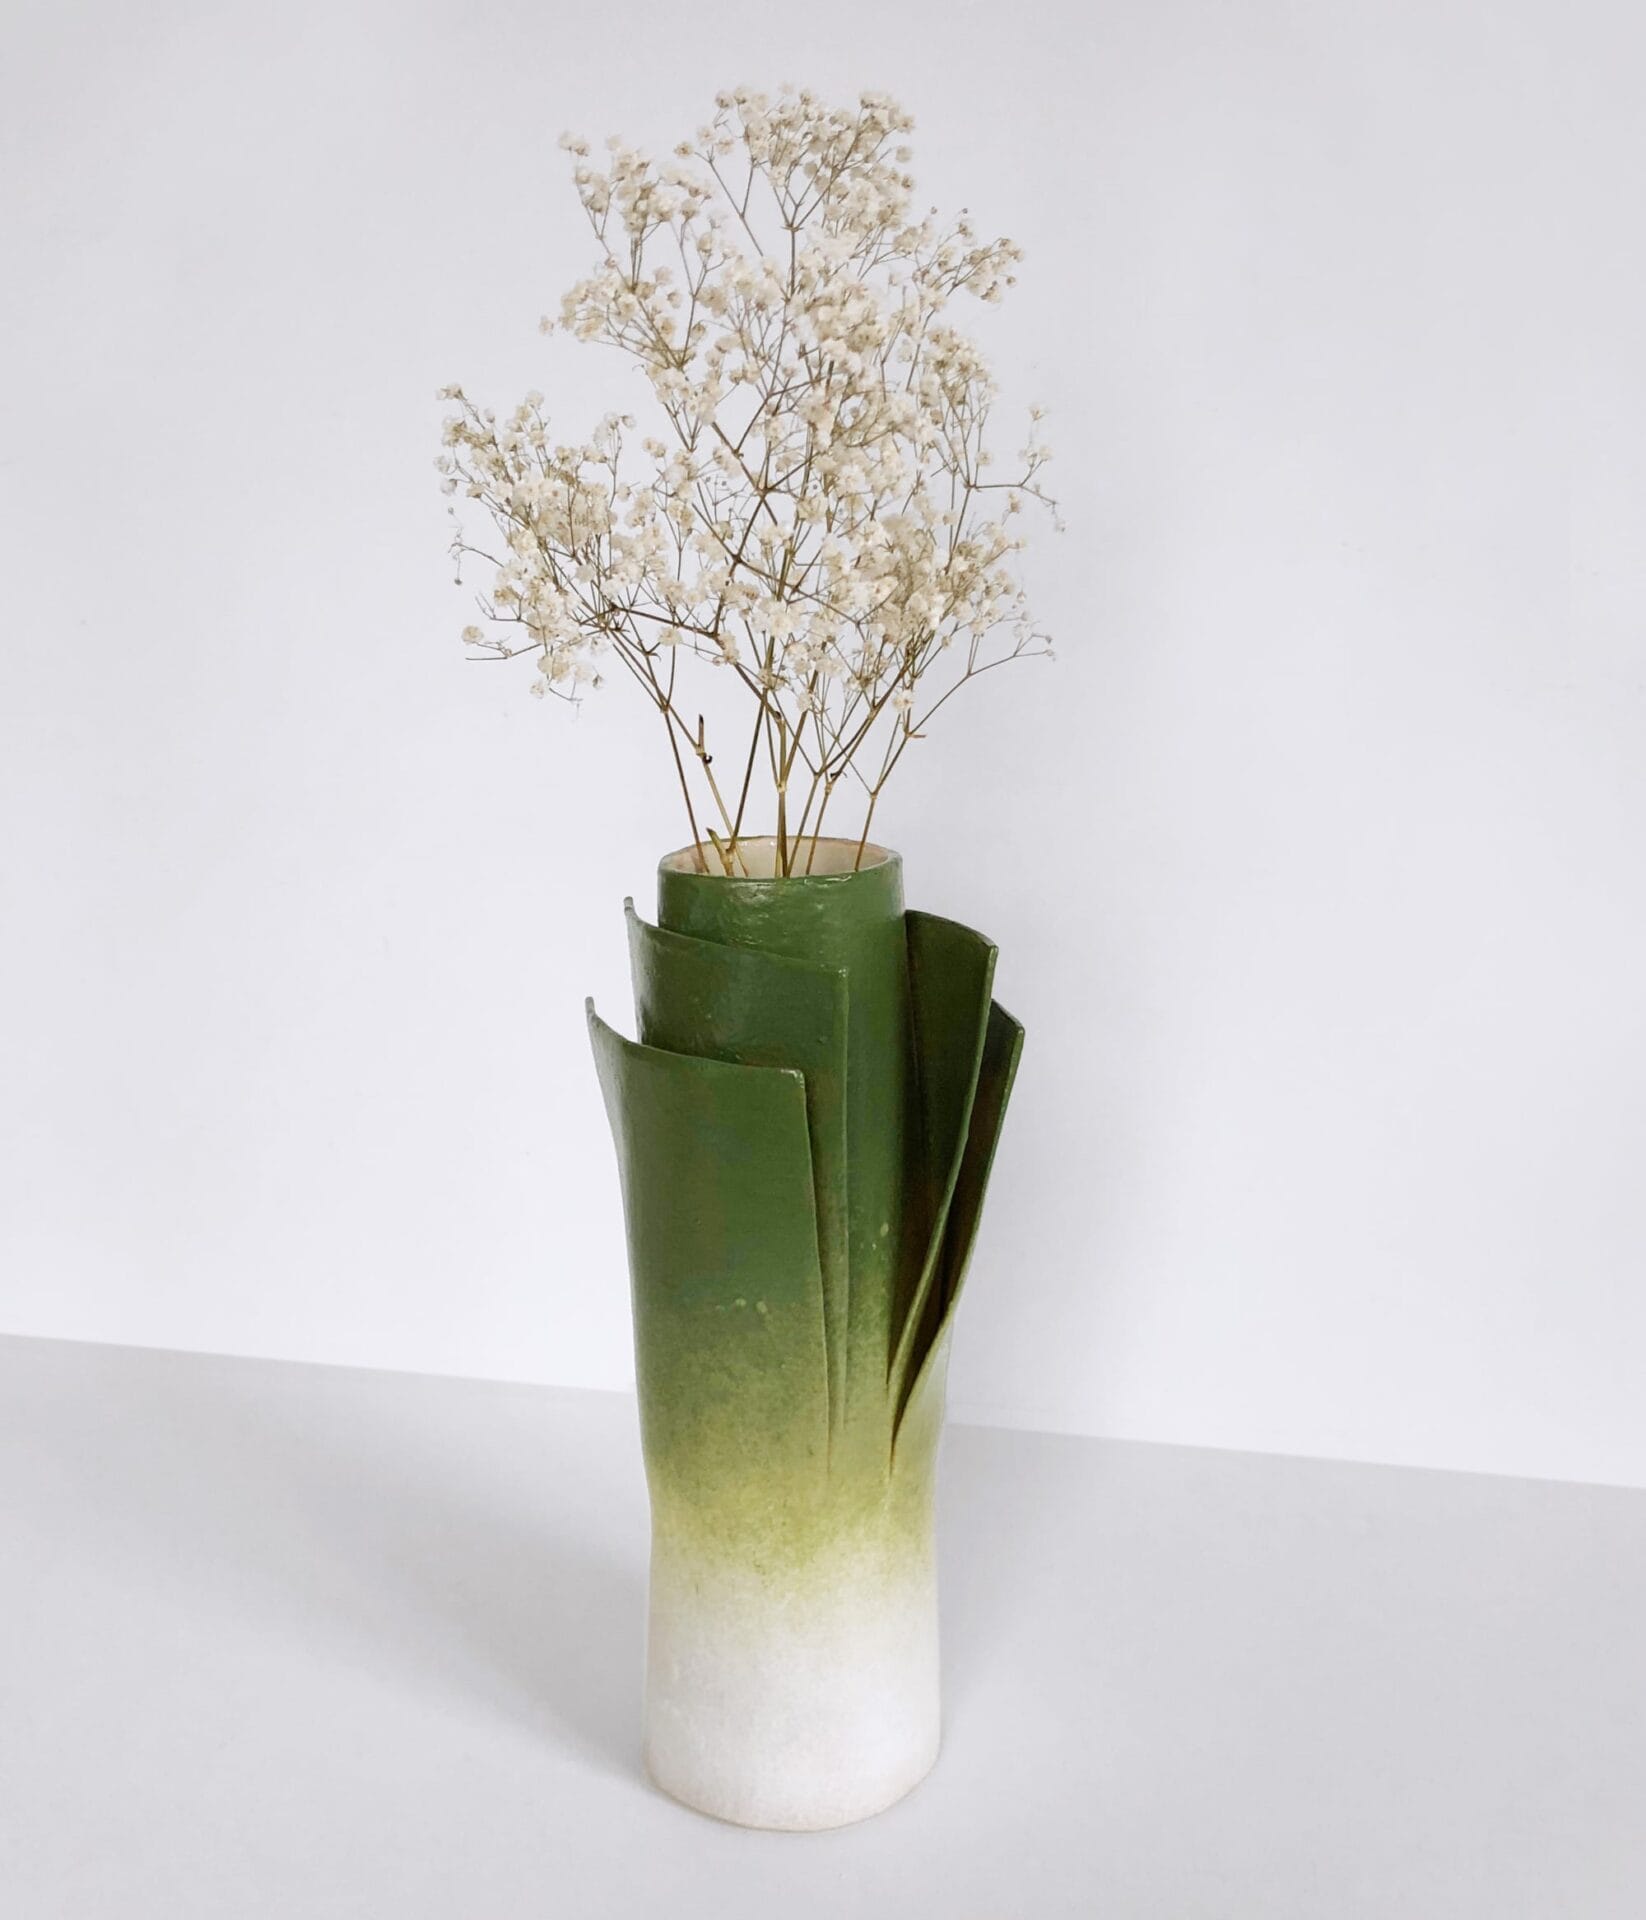 a vase that looks like a cut leek with baby's breath poking from the top